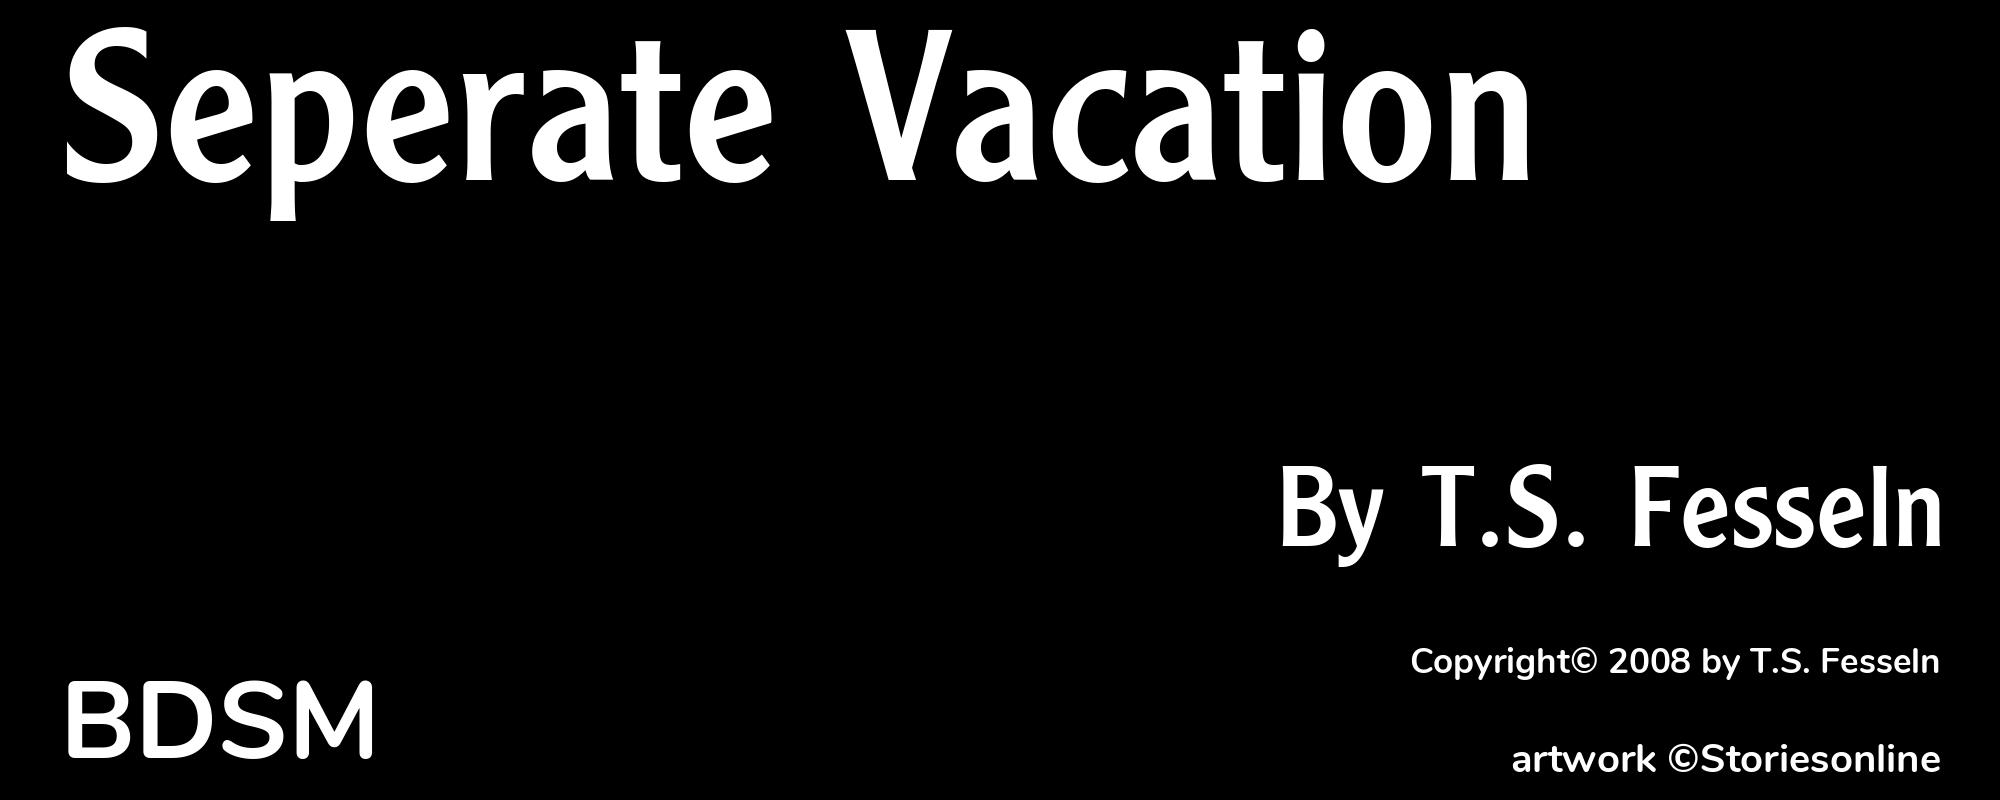 Seperate Vacation - Cover